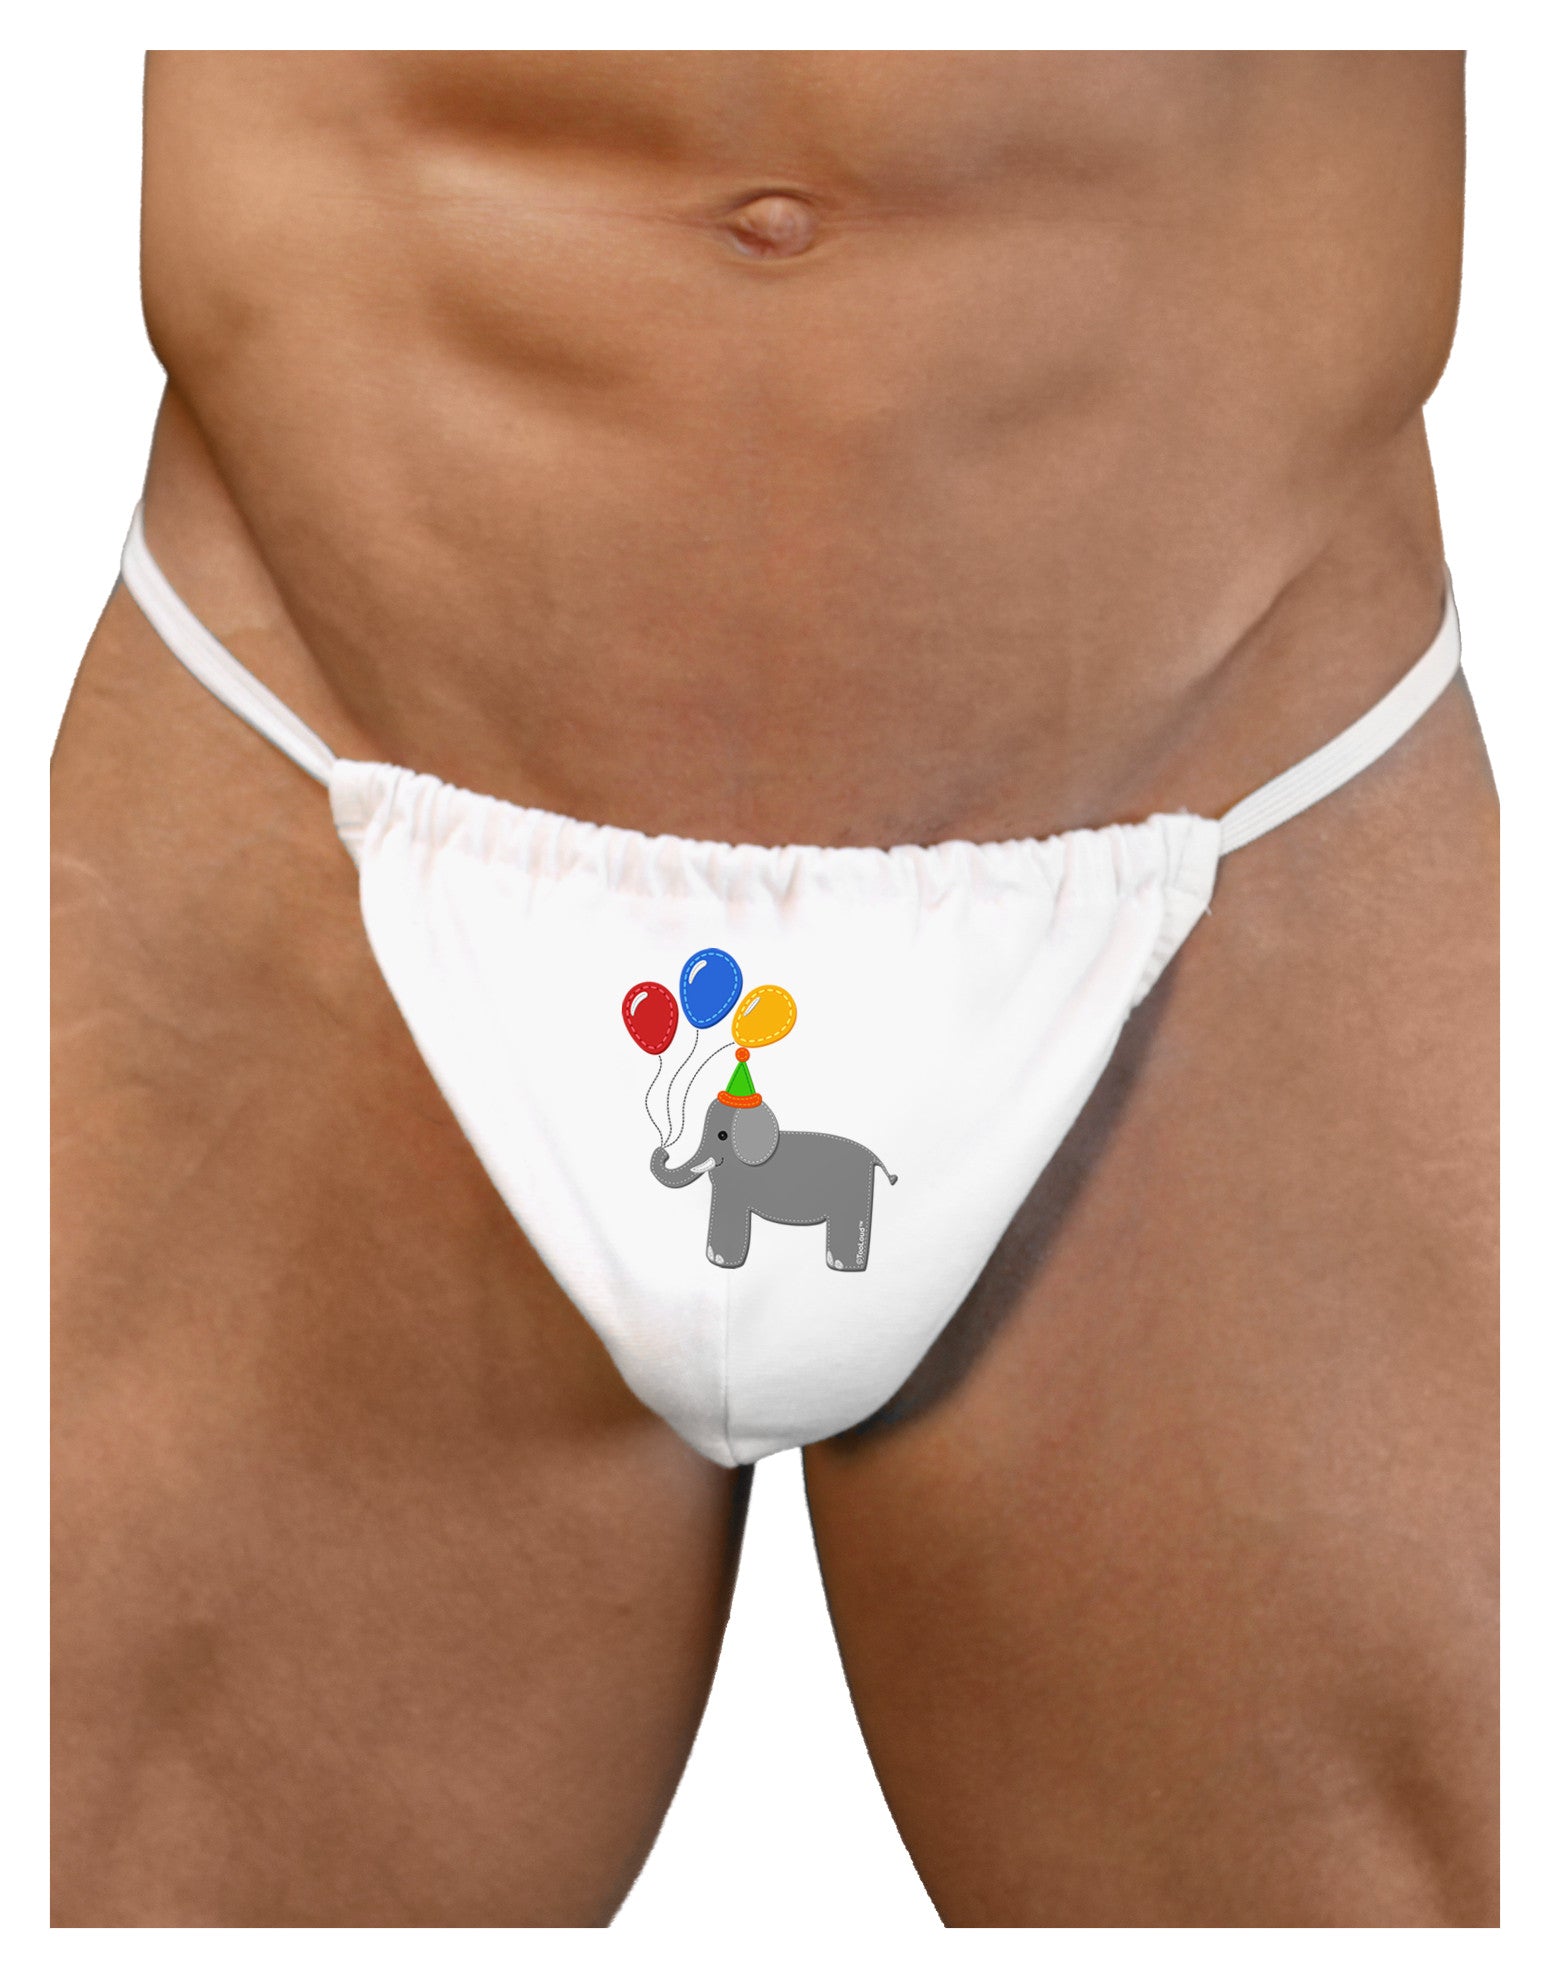 Cute Elephant with Balloons Mens G-String Underwear